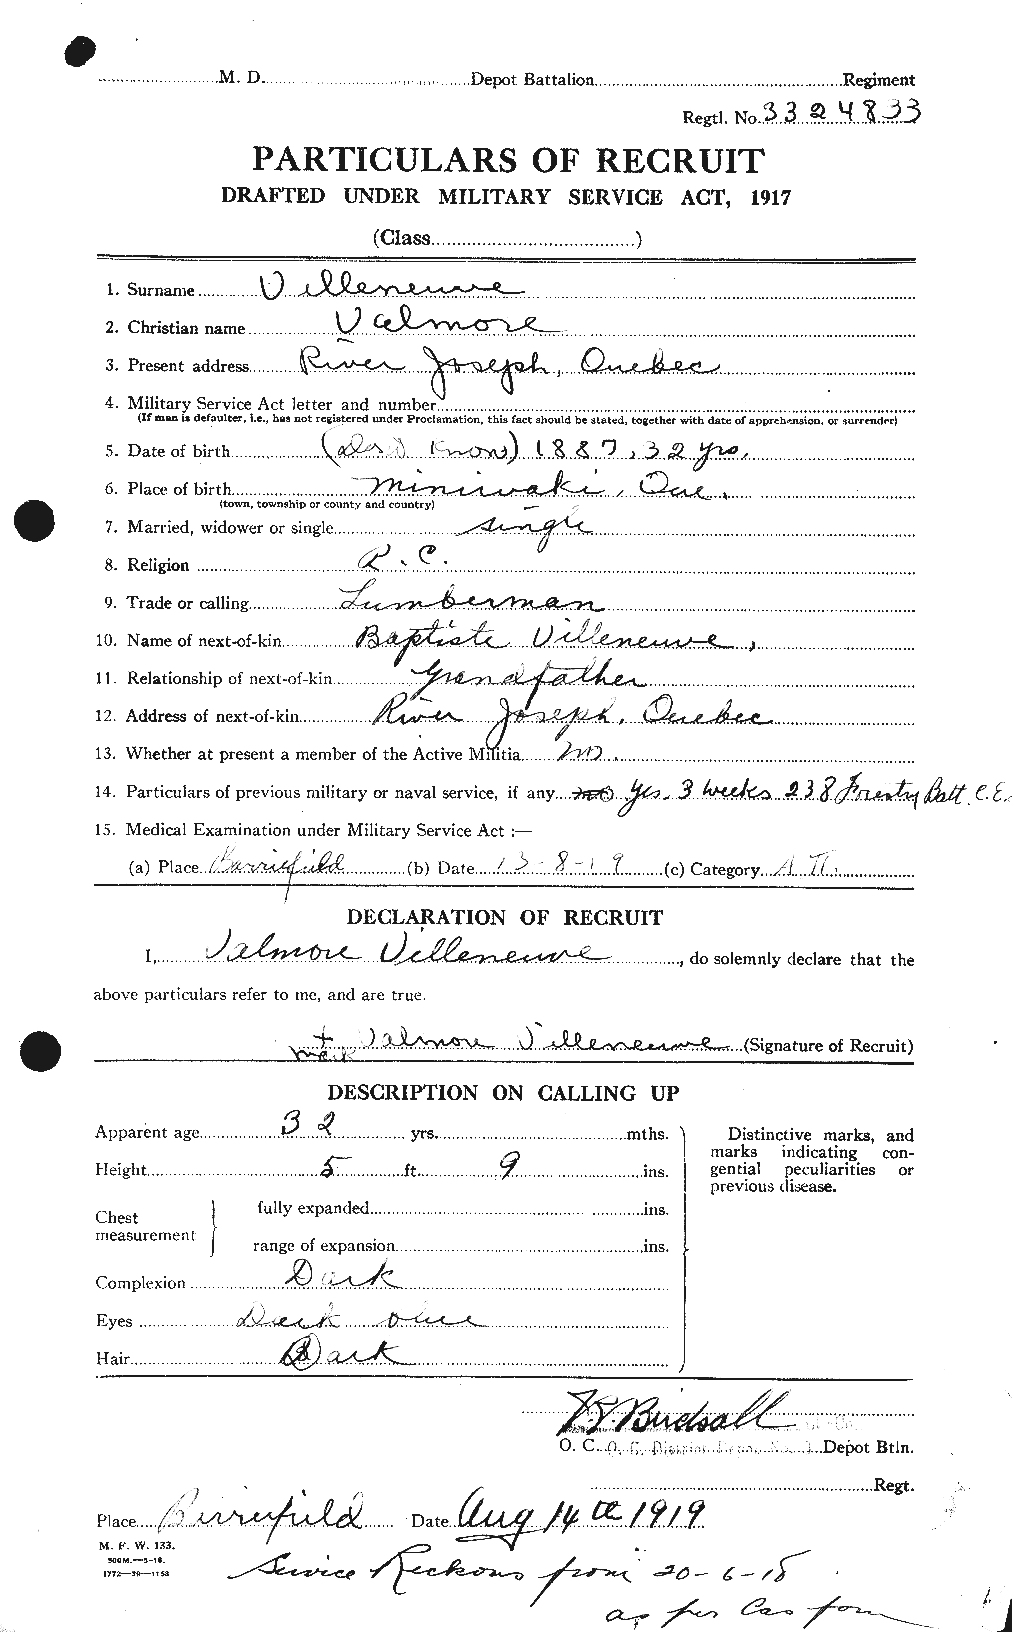 Personnel Records of the First World War - CEF 653887a